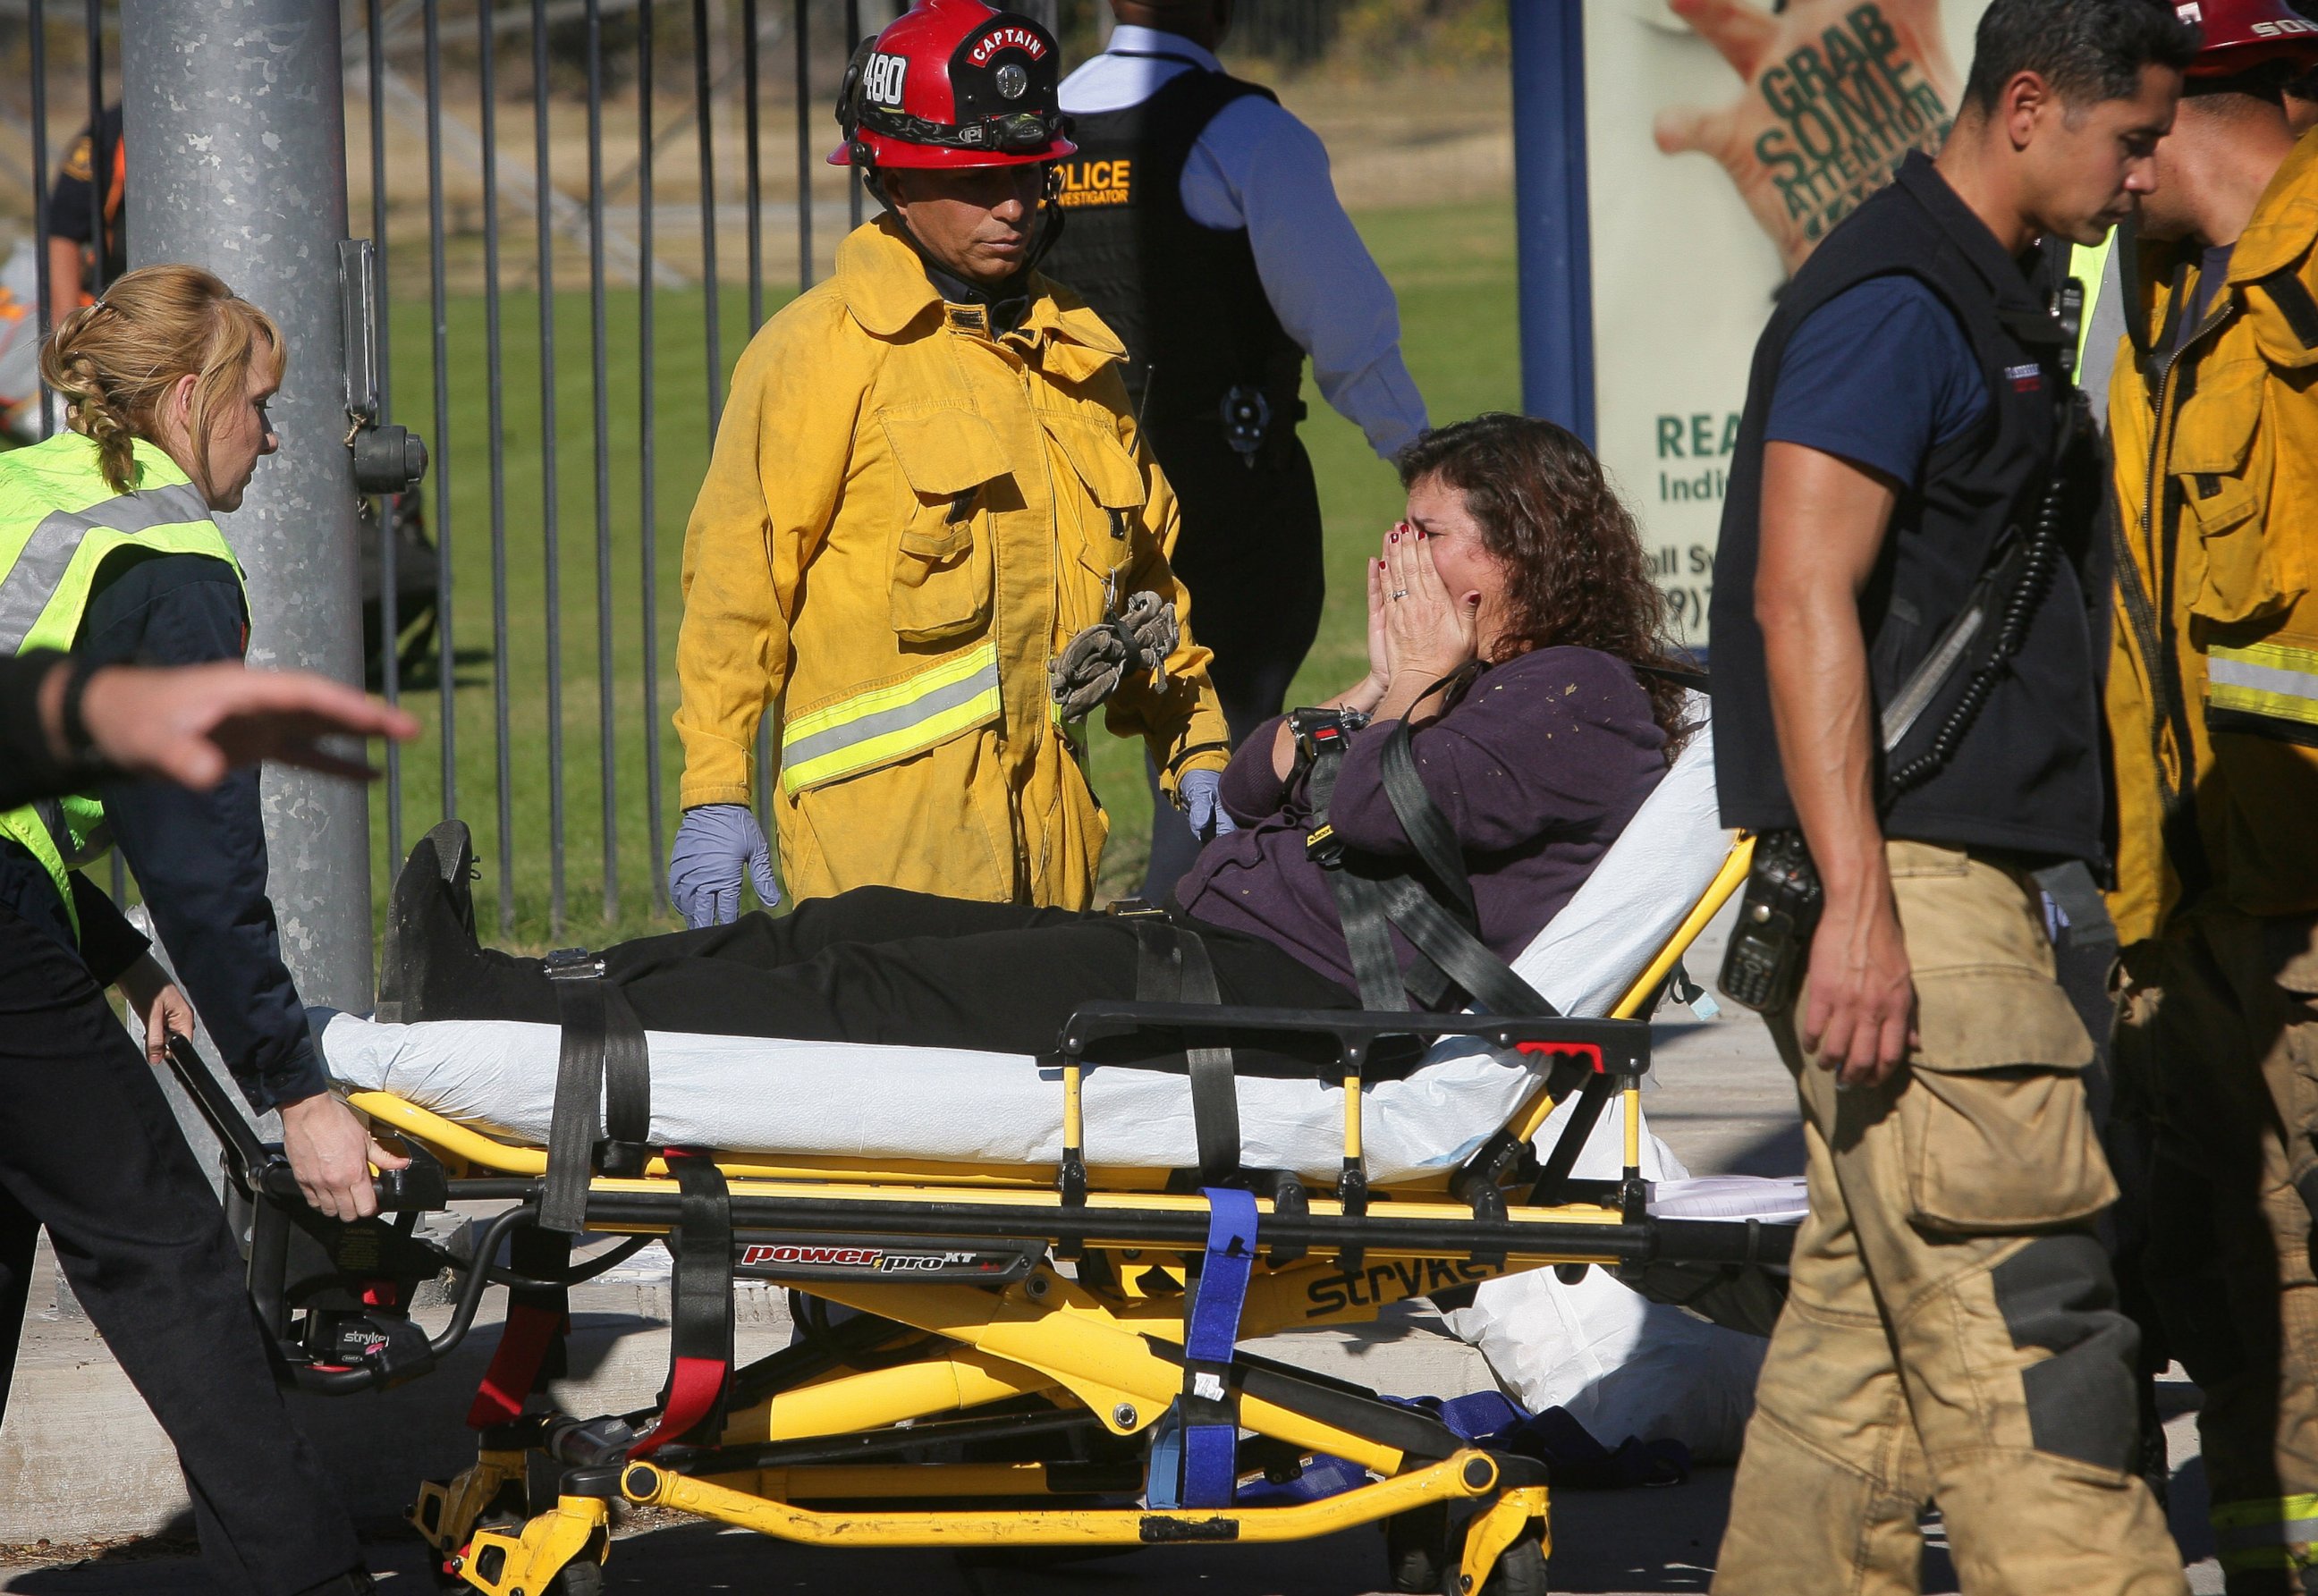 PHOTO: A victim is wheeled away on a stretcher following a shooting that killed multiple people at a social services facility, Dec. 2, 2015, in San Bernardino, Calif. 